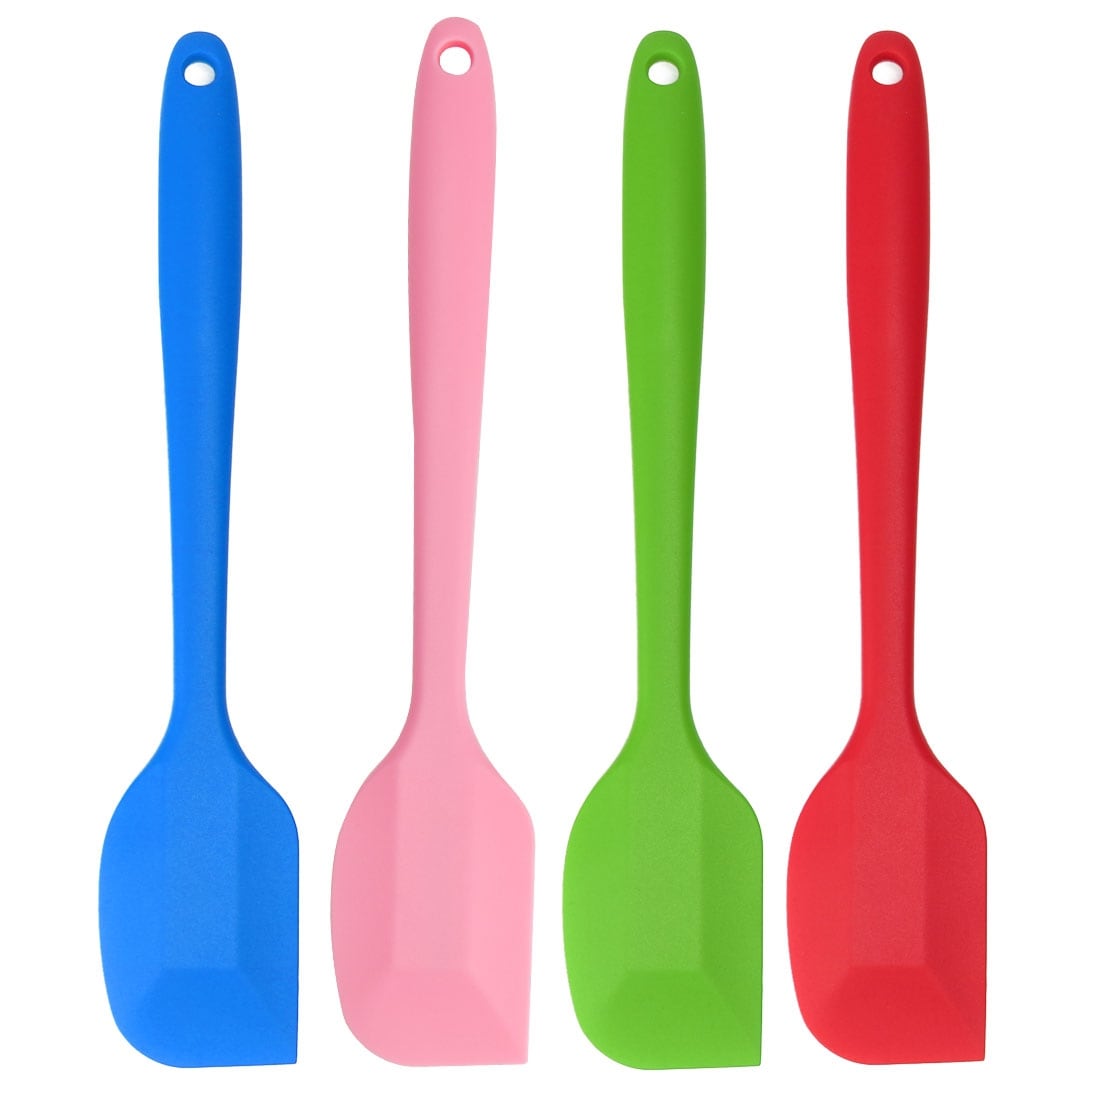 Kaluns Heat Resistant Rubber Silicone Spatula (Set of 8), Red